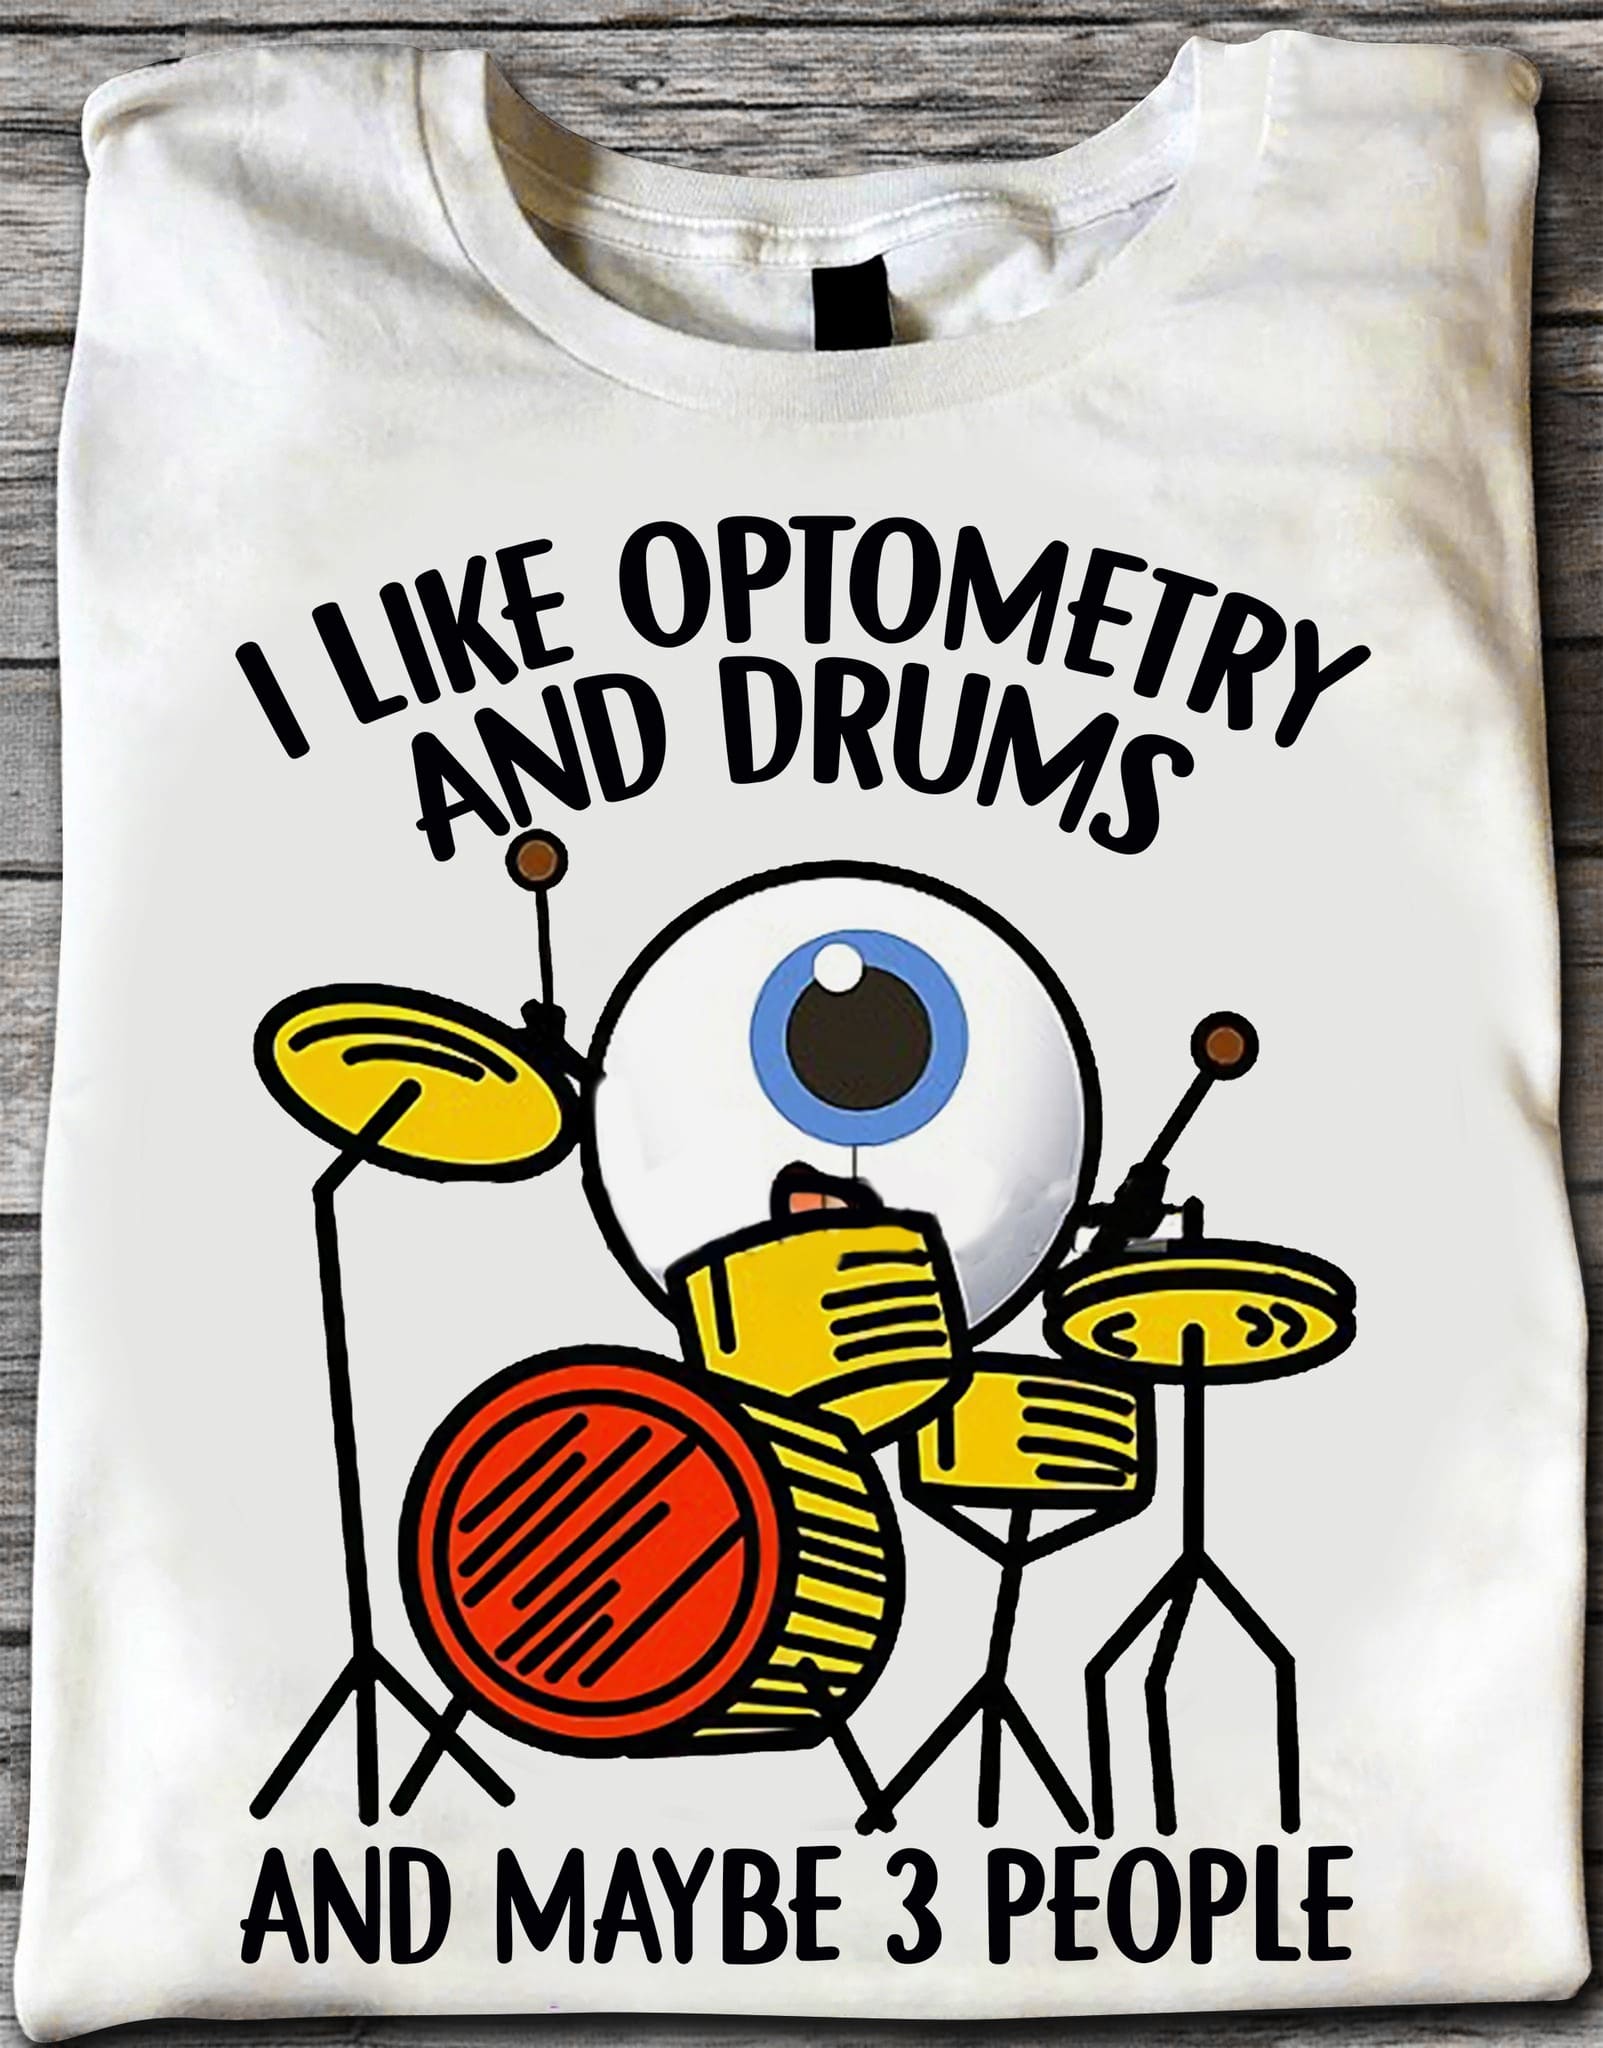 Optometry Drums - I like Optometry and drums and maybe 3 people